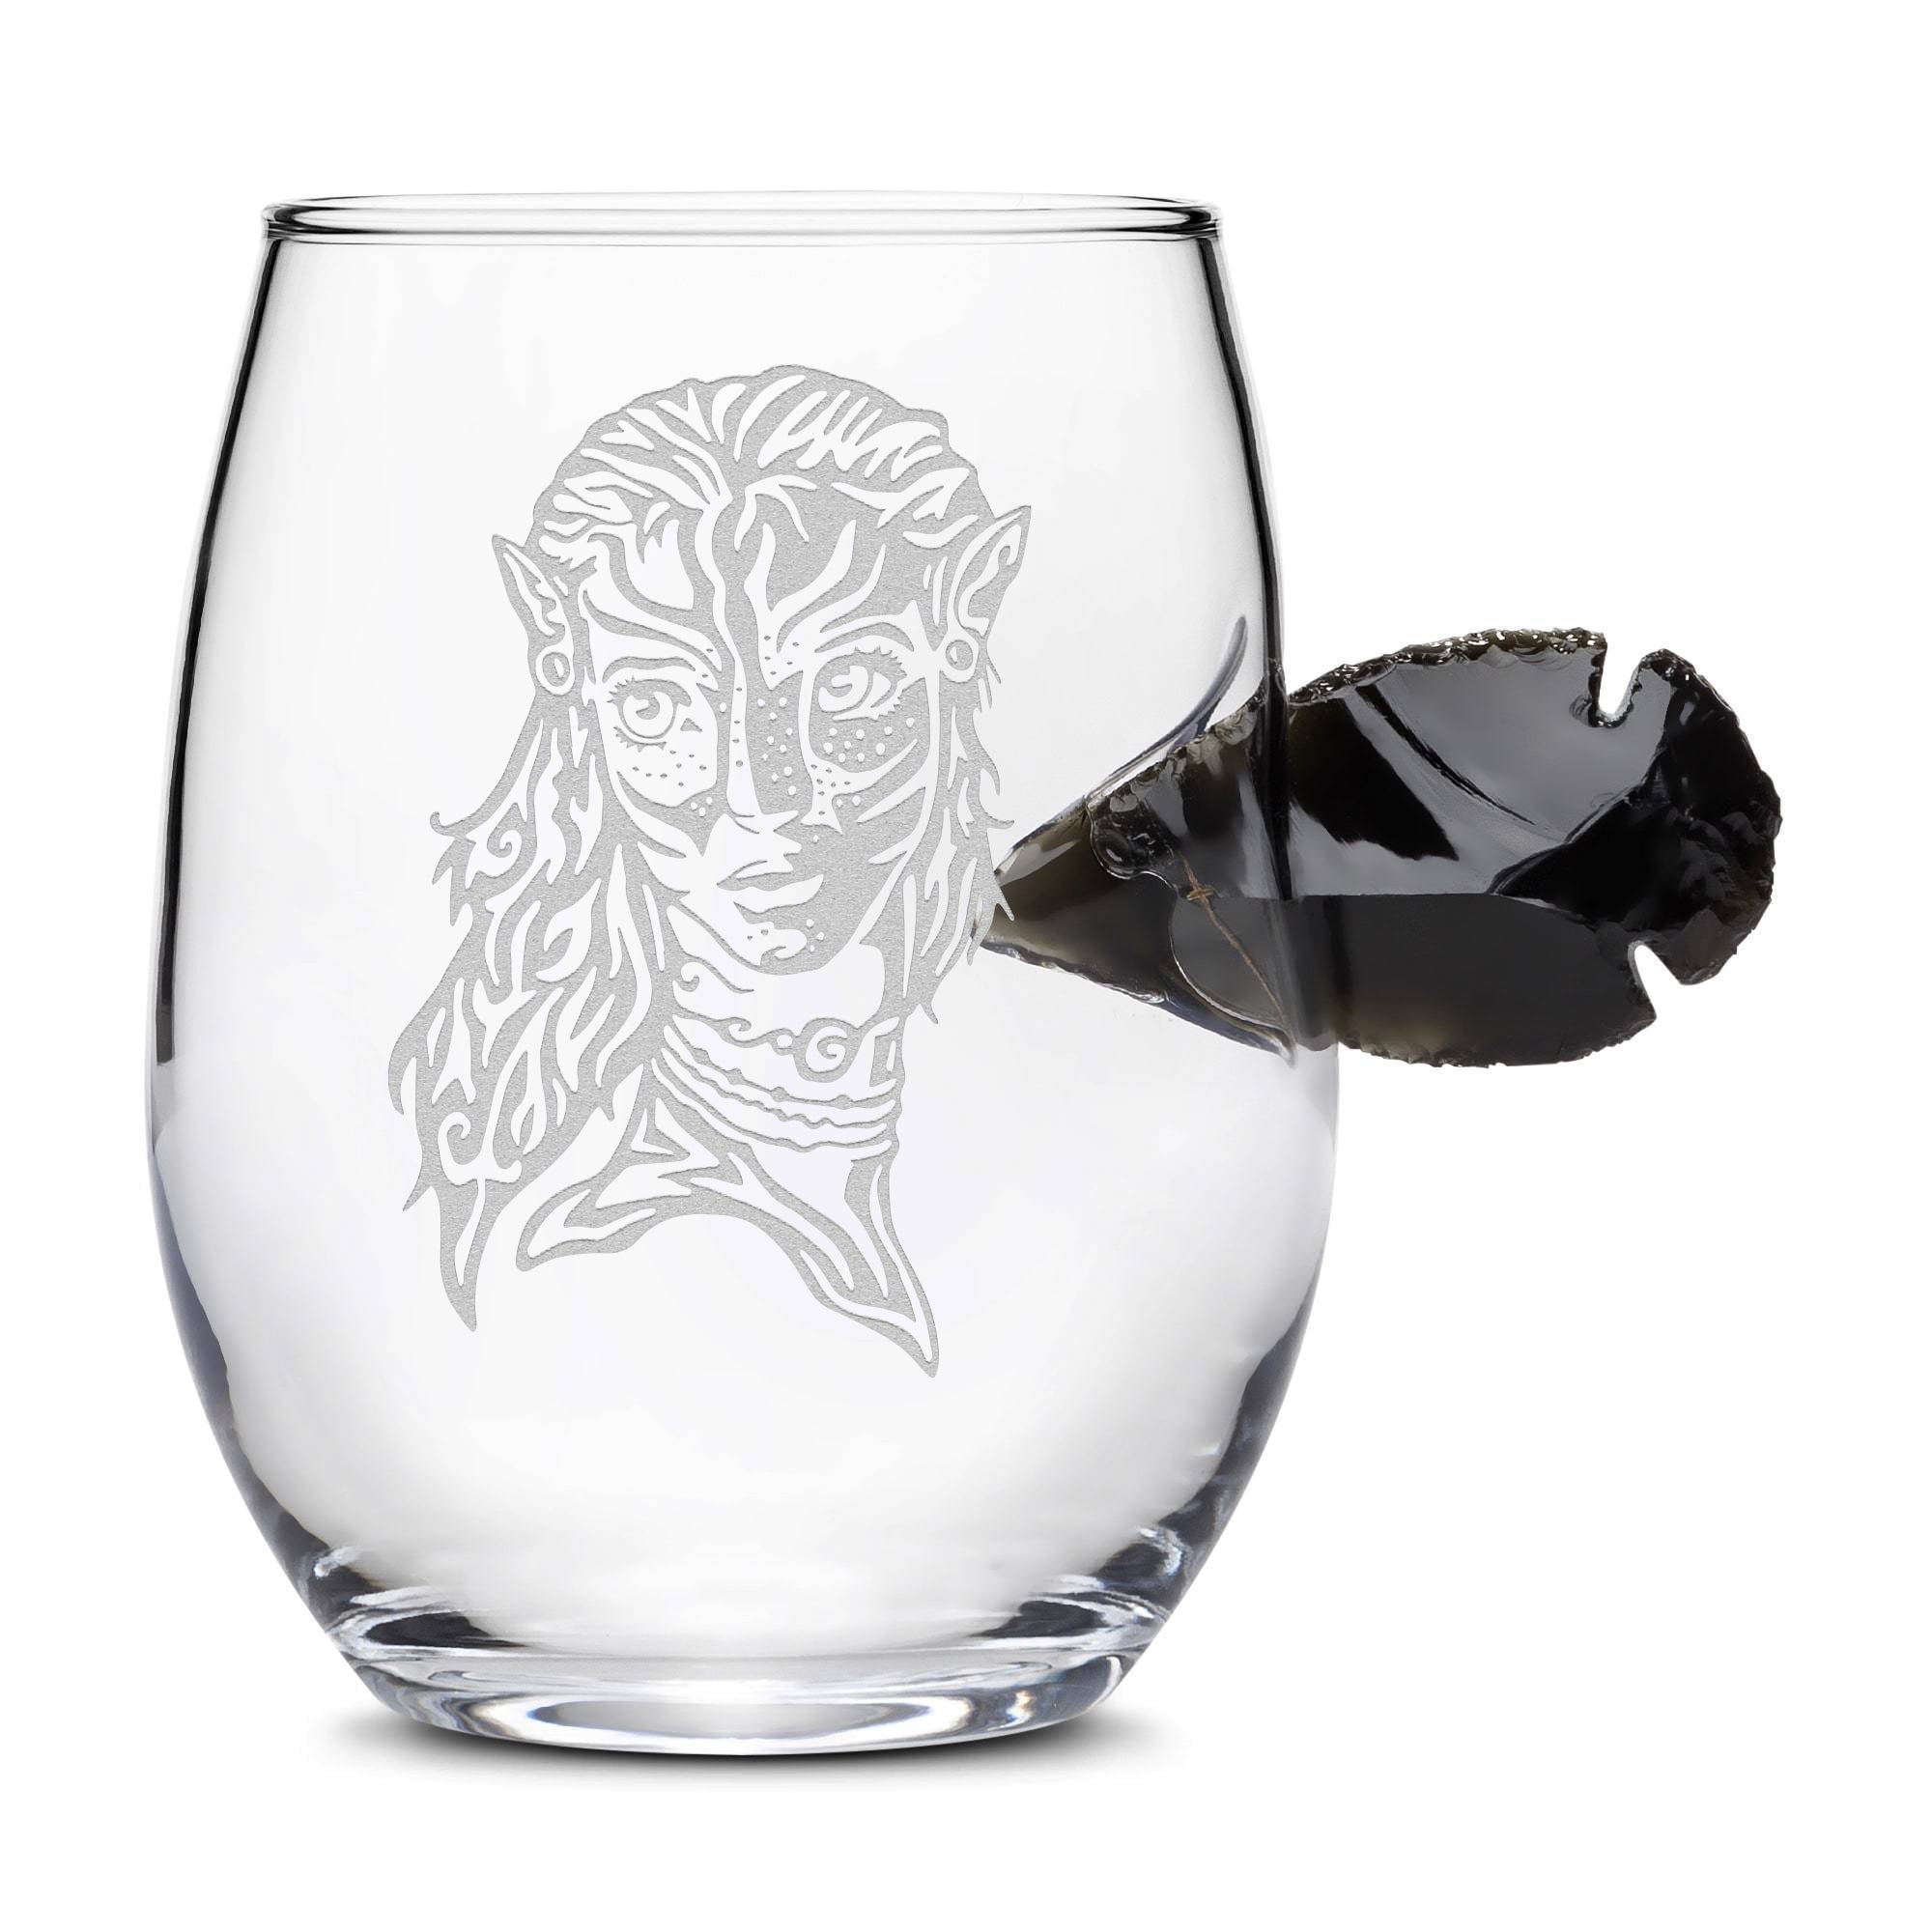 Integrity Bottles, Pandora Way of Water, Avatar Warrior Neytiri, Obsidian Arrowhead, Stemless Wine Glass, 15oz, Laser Etched or Hand Etched